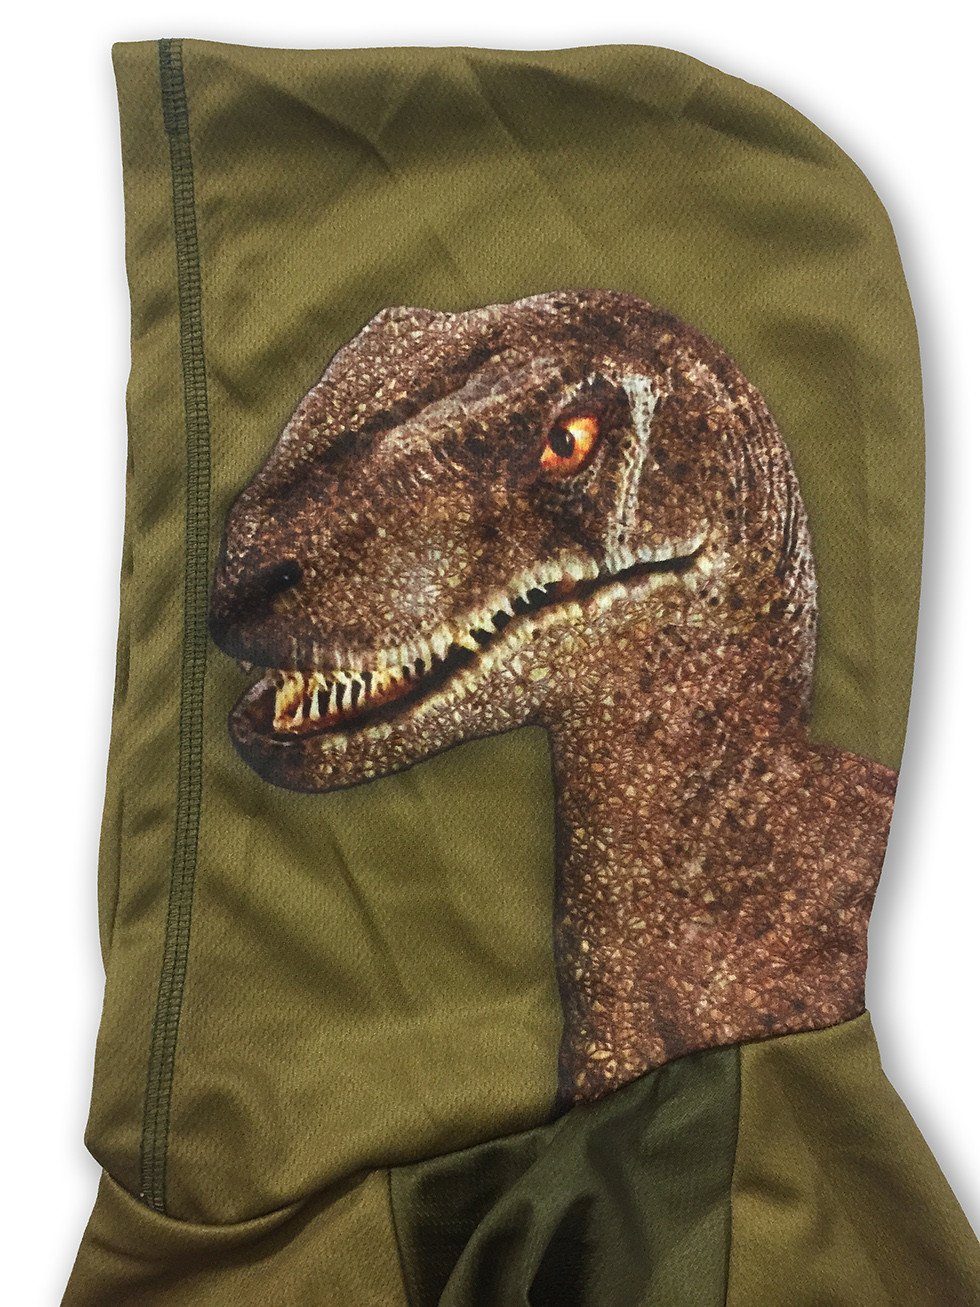 RAPTOR Dino 3D Hoodie Sport Shirt by MOUTHMAN® Kid's Clothing 